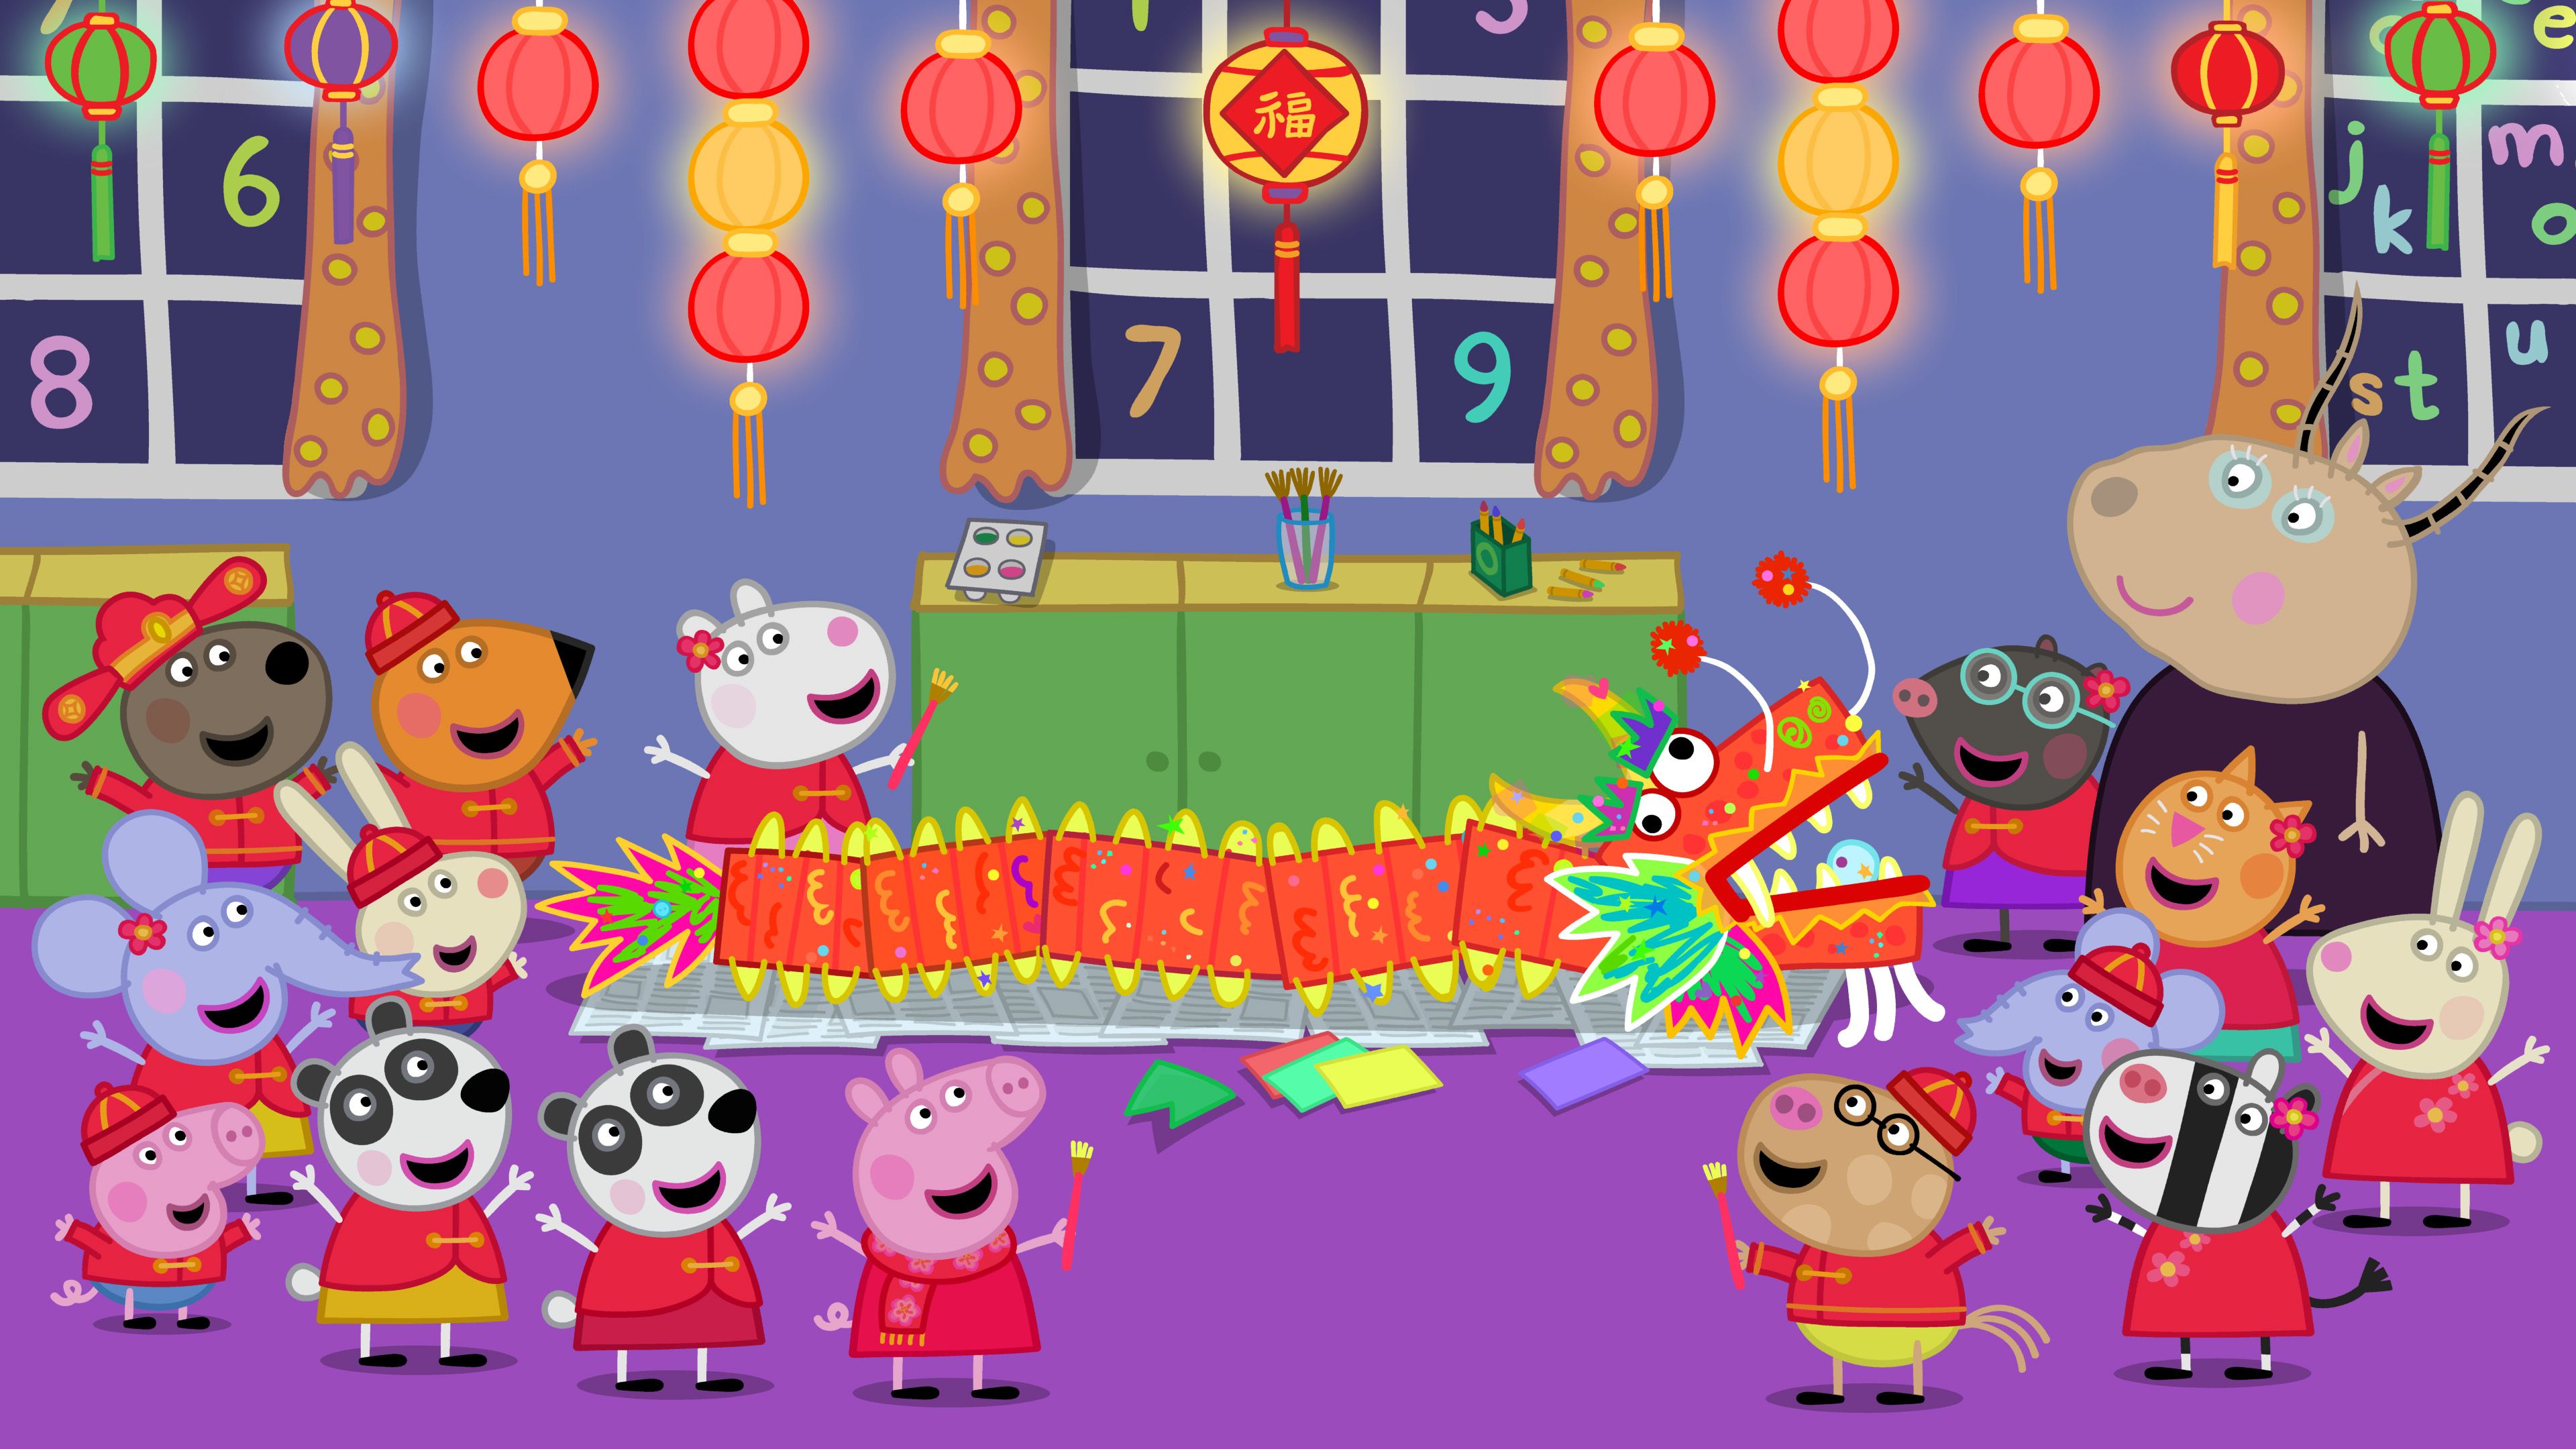 Here's a Sneak Peek of the Chinese New Year Episode of Peppa Pig